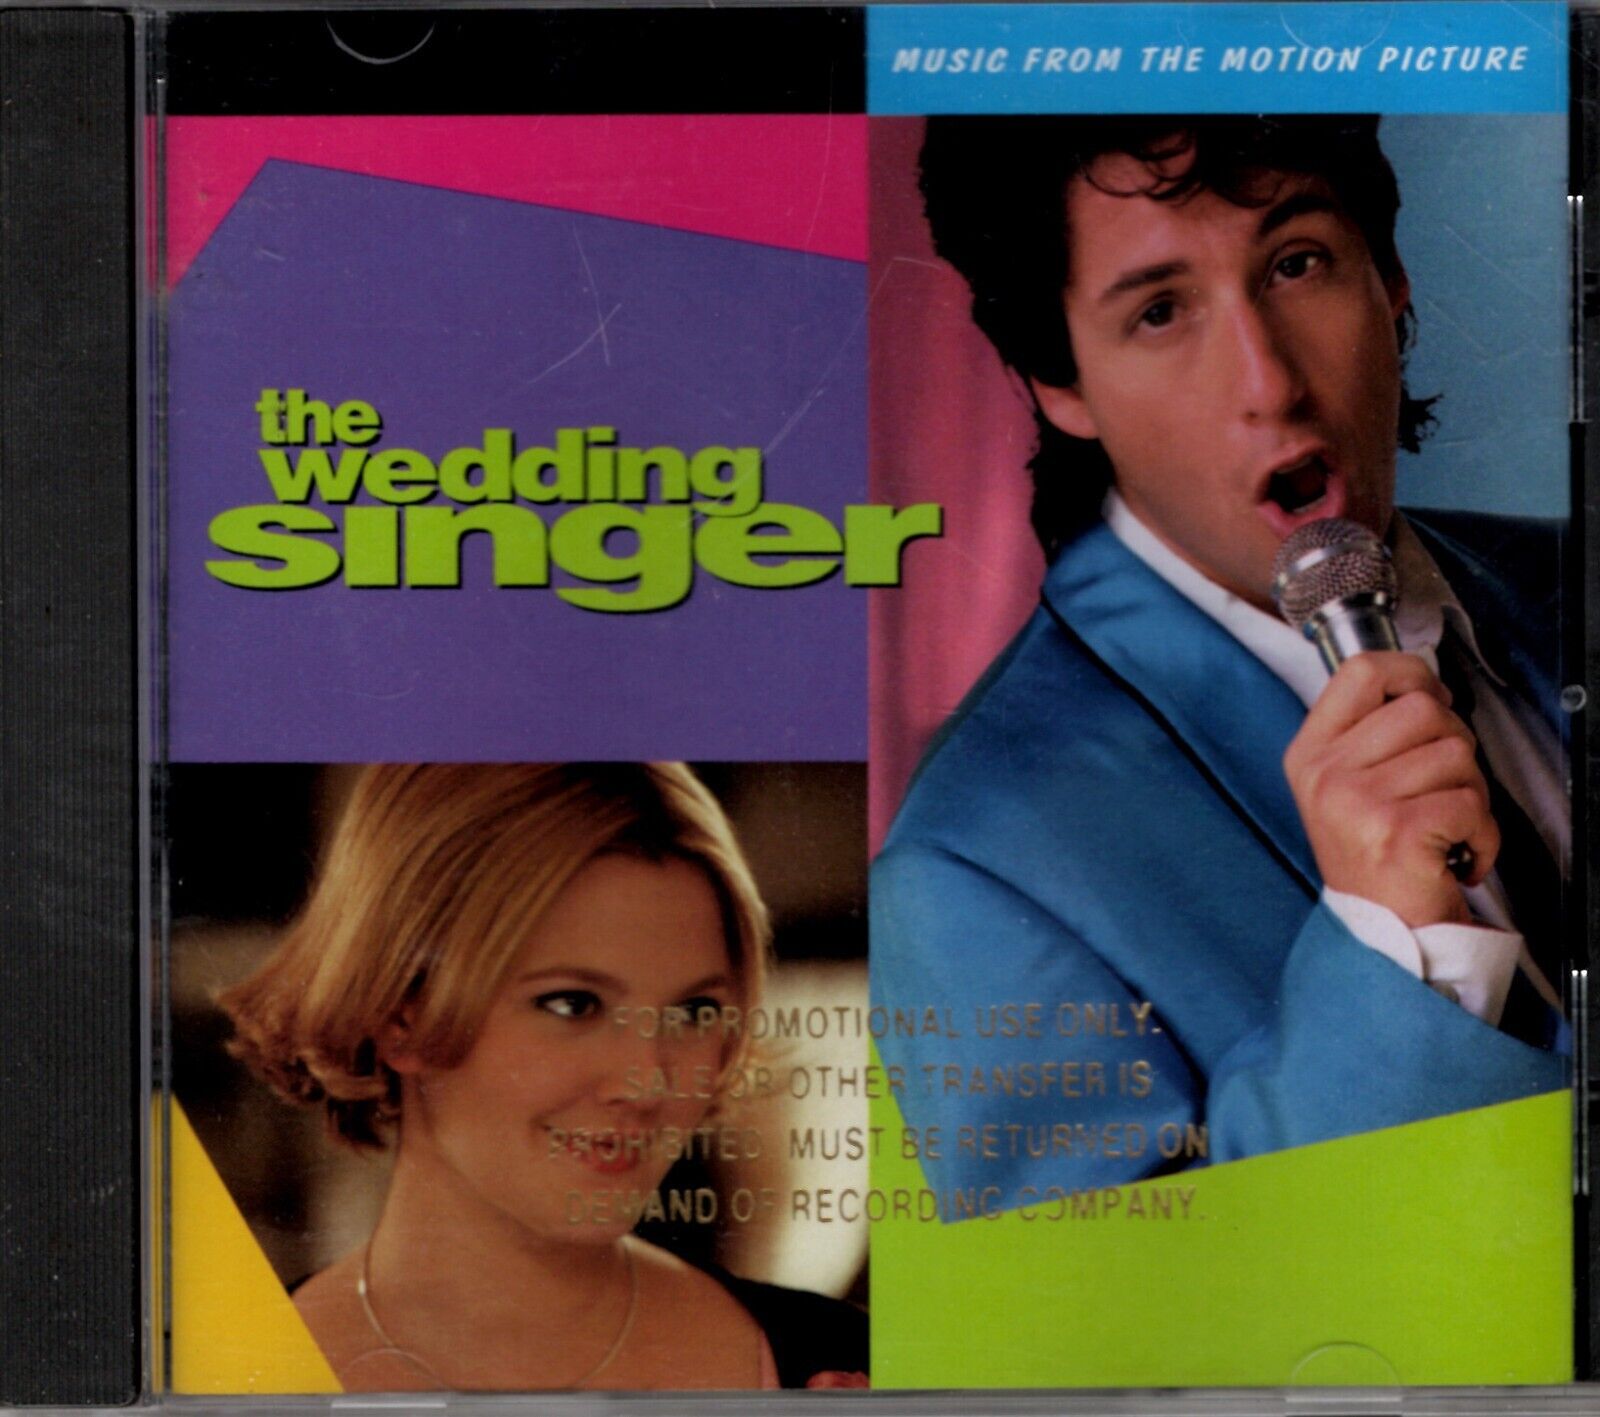 The Wedding Singer (Music From the Motion Picture) by Various Artists (CD, 1997)